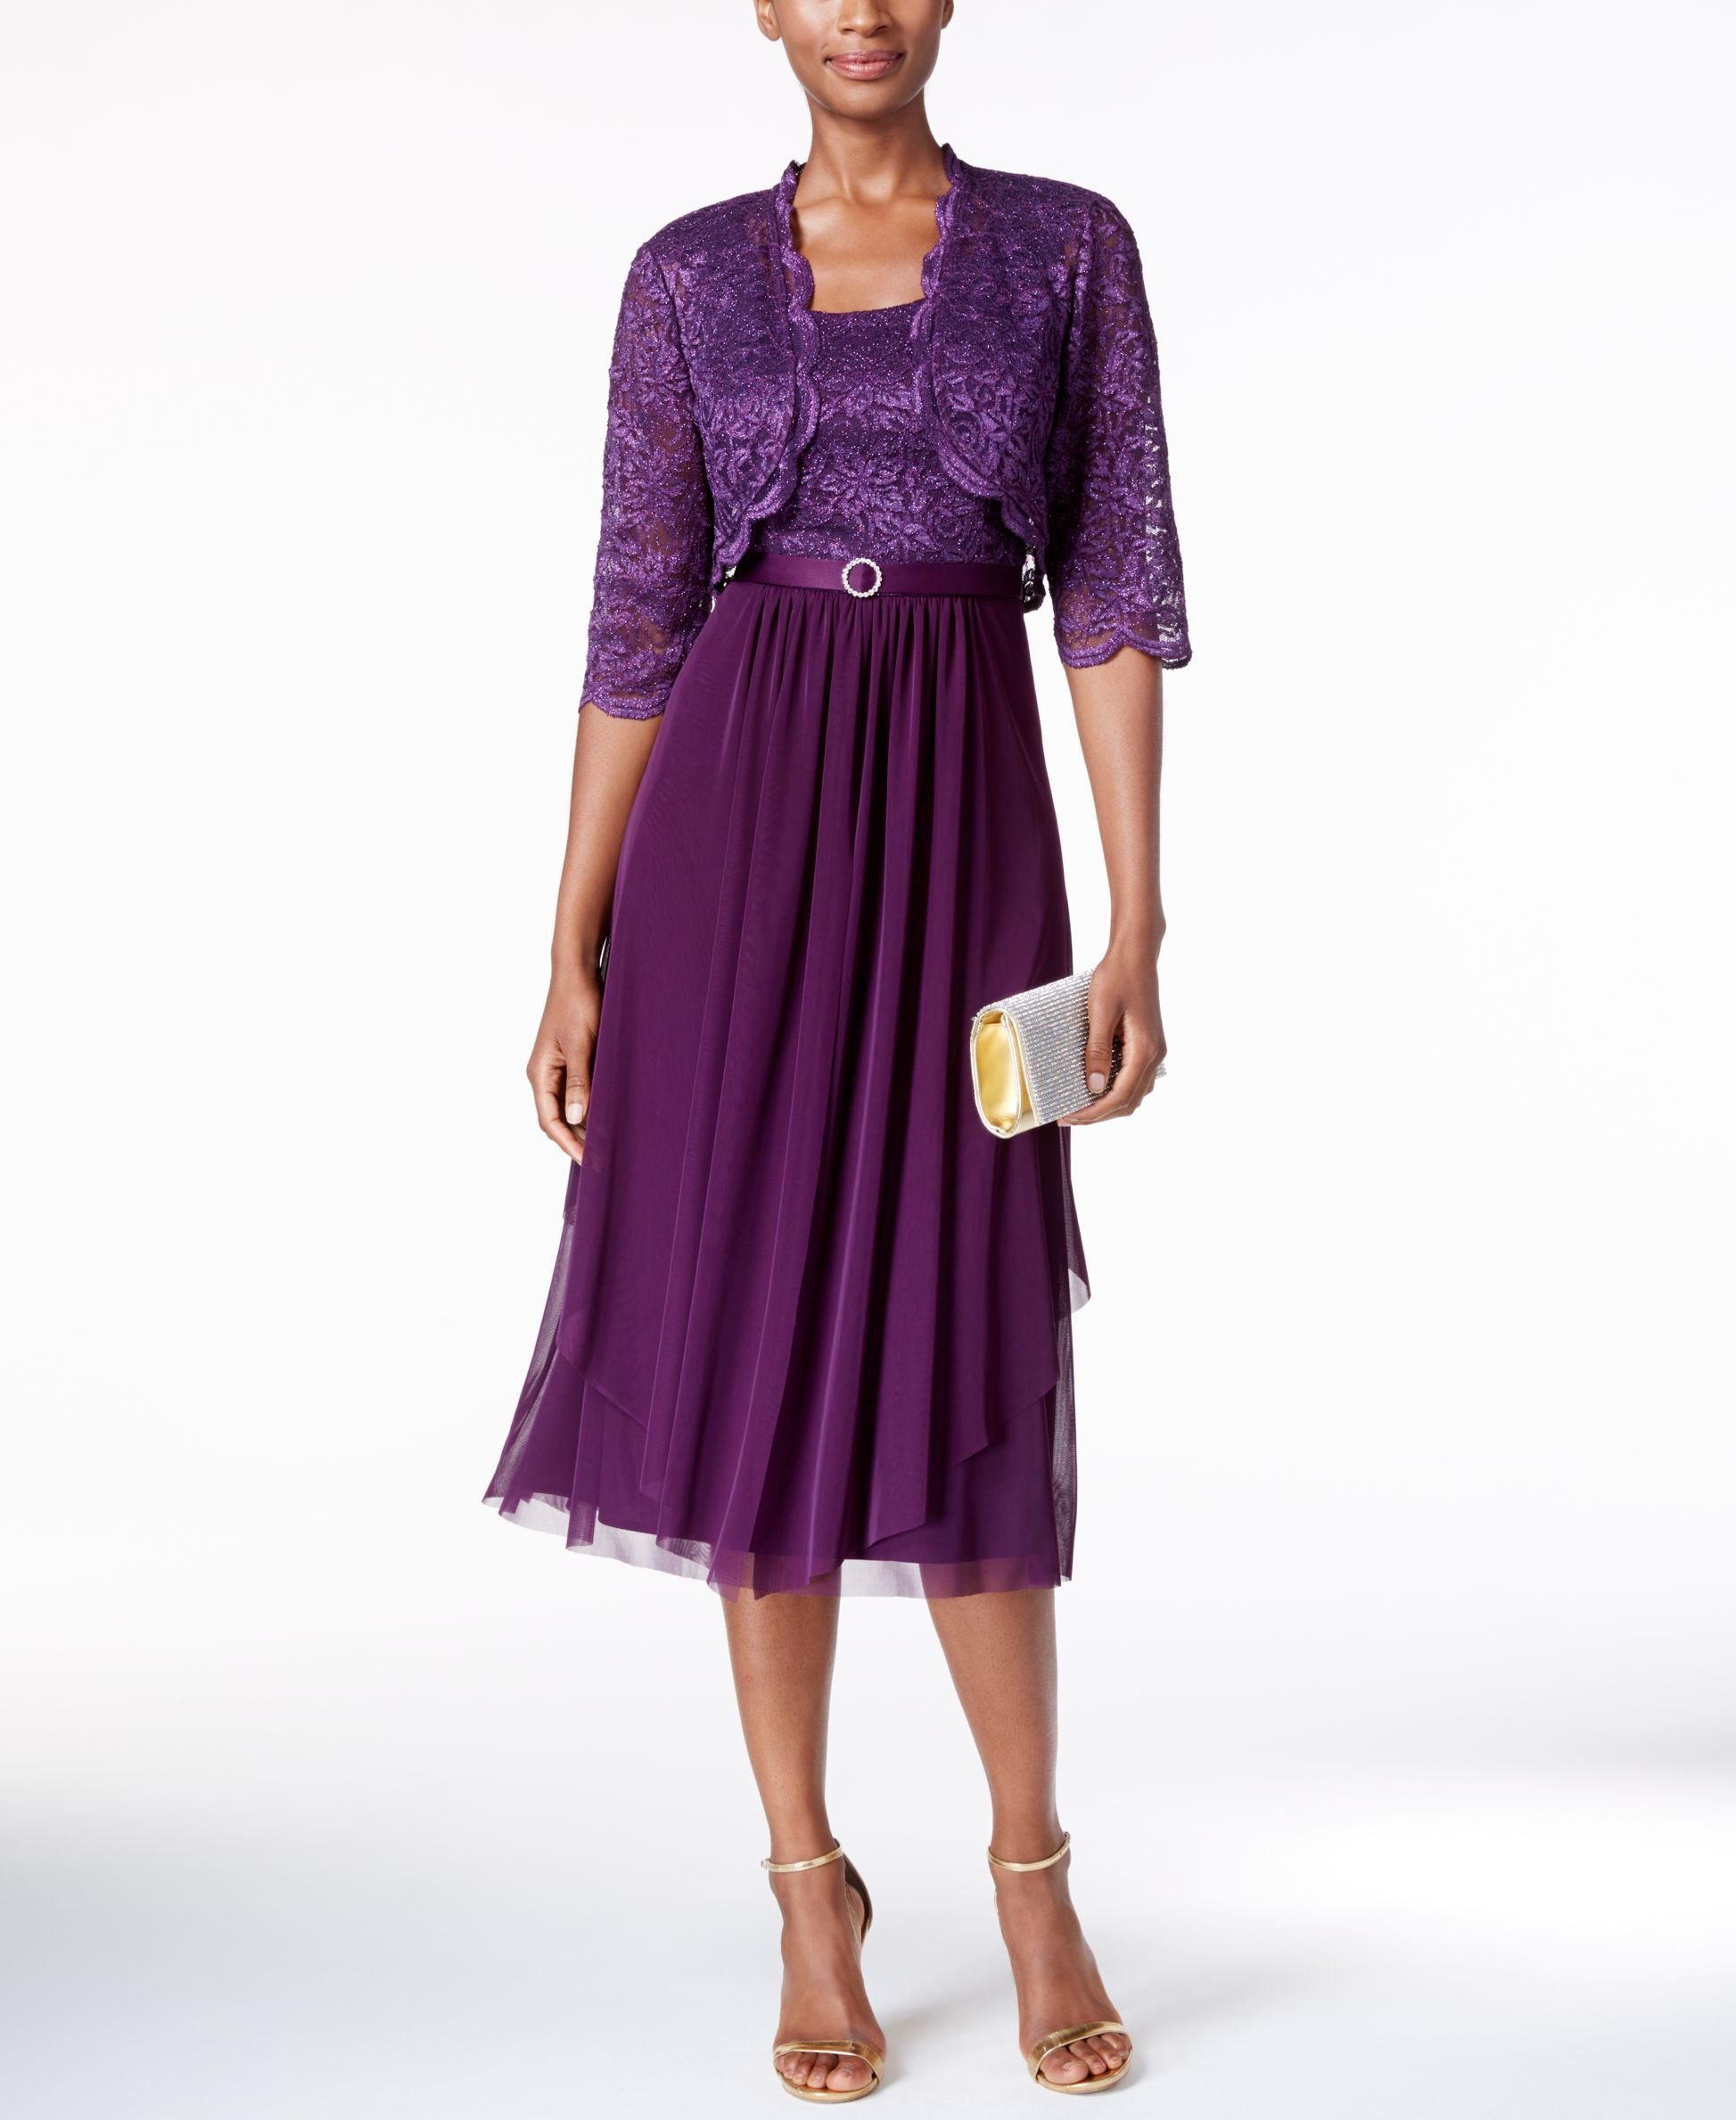 R & m richards Petite Belted Glitter Lace Dress And Jacket in Purple | Lyst